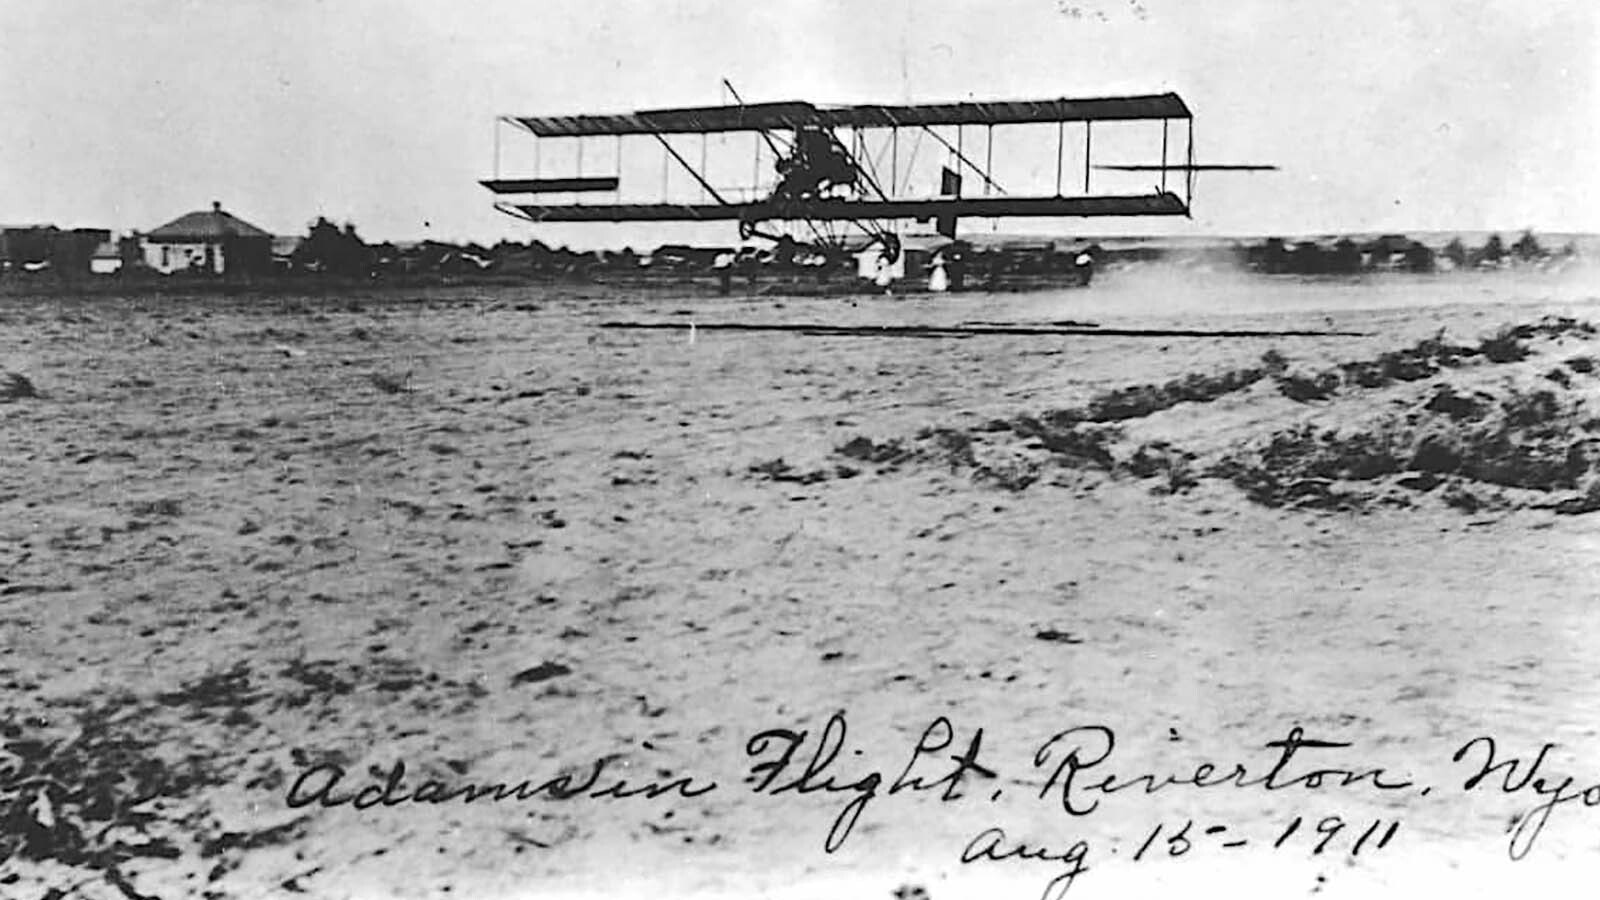 The historical flight of William S. Adams in Riverton, Wyoming, in 1911.